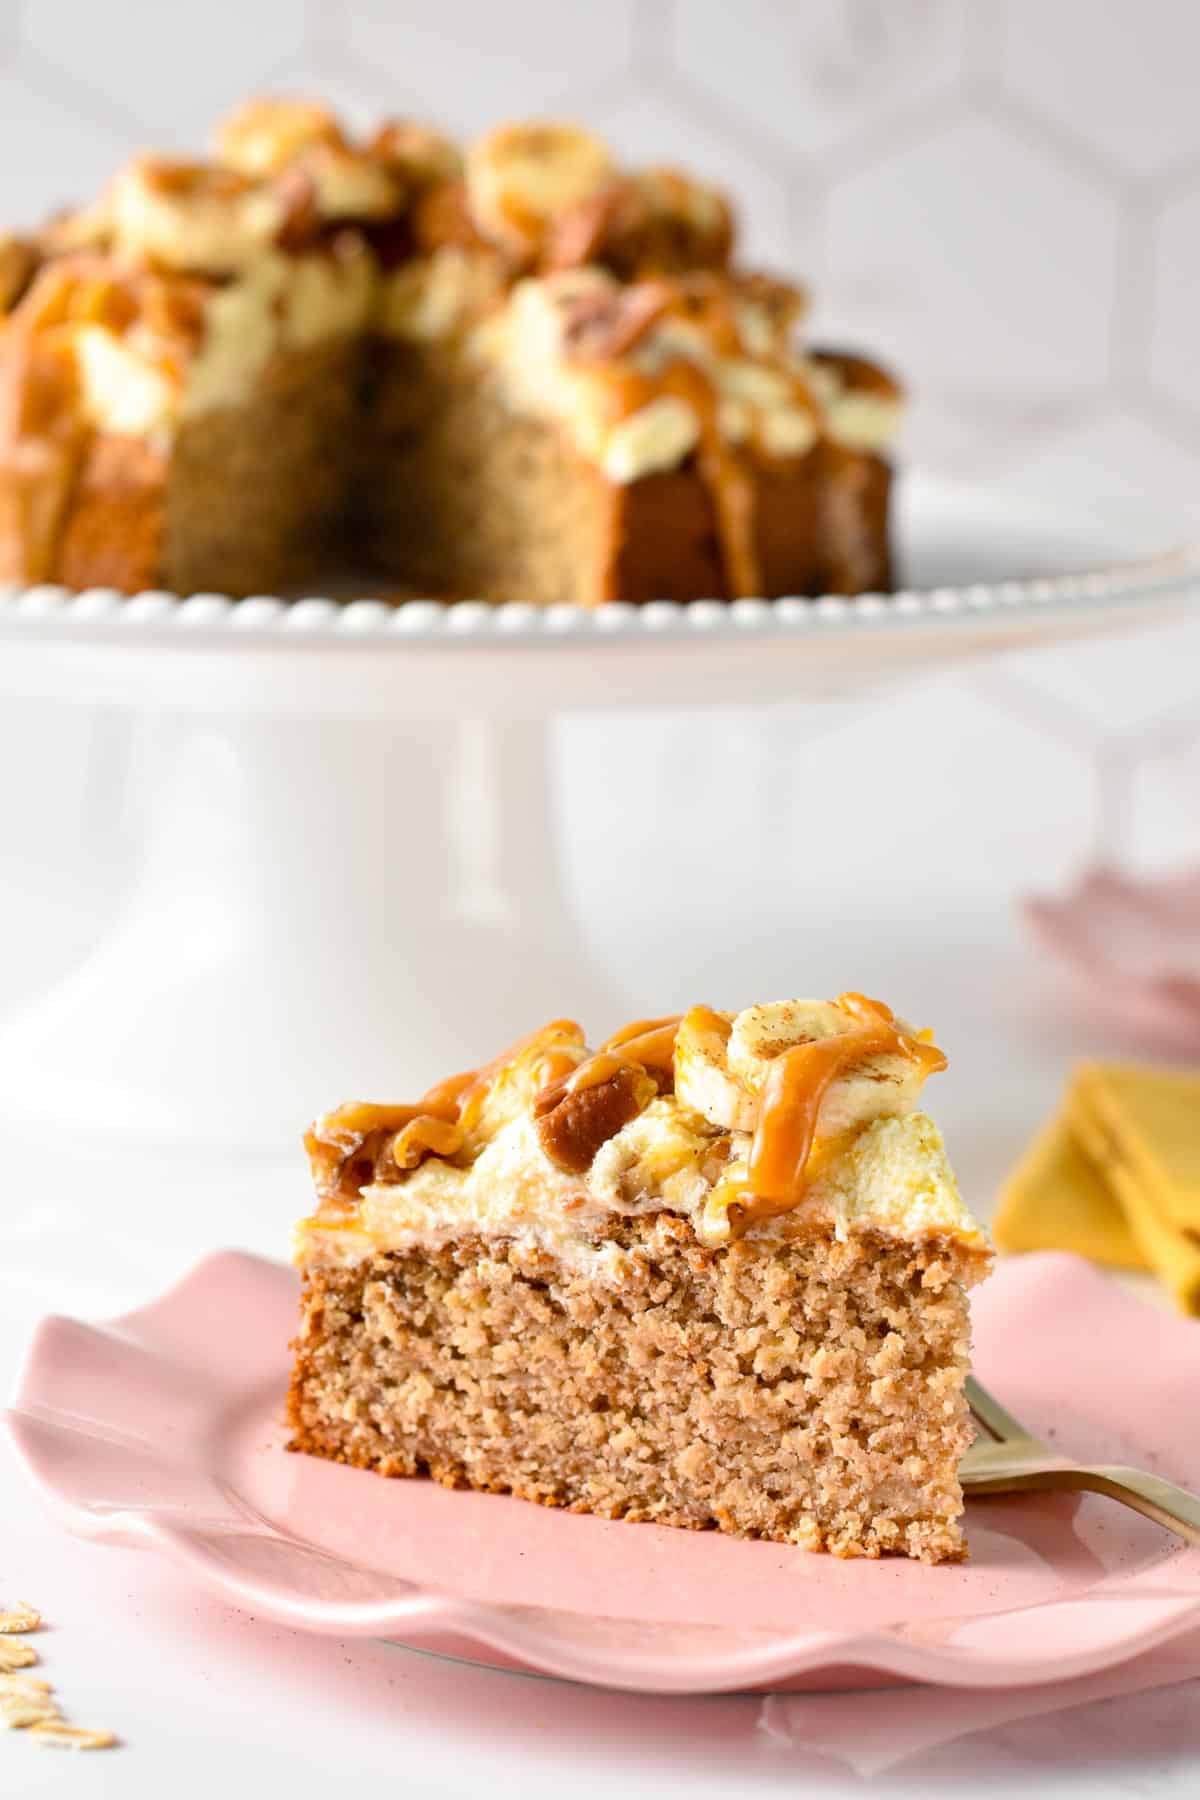 A slice of single layer oat flour cake topped with dairy-free vanilla frosting, banana slices, walnuts, pecans, and peanut butter caramel on a small pink plate with golden forks